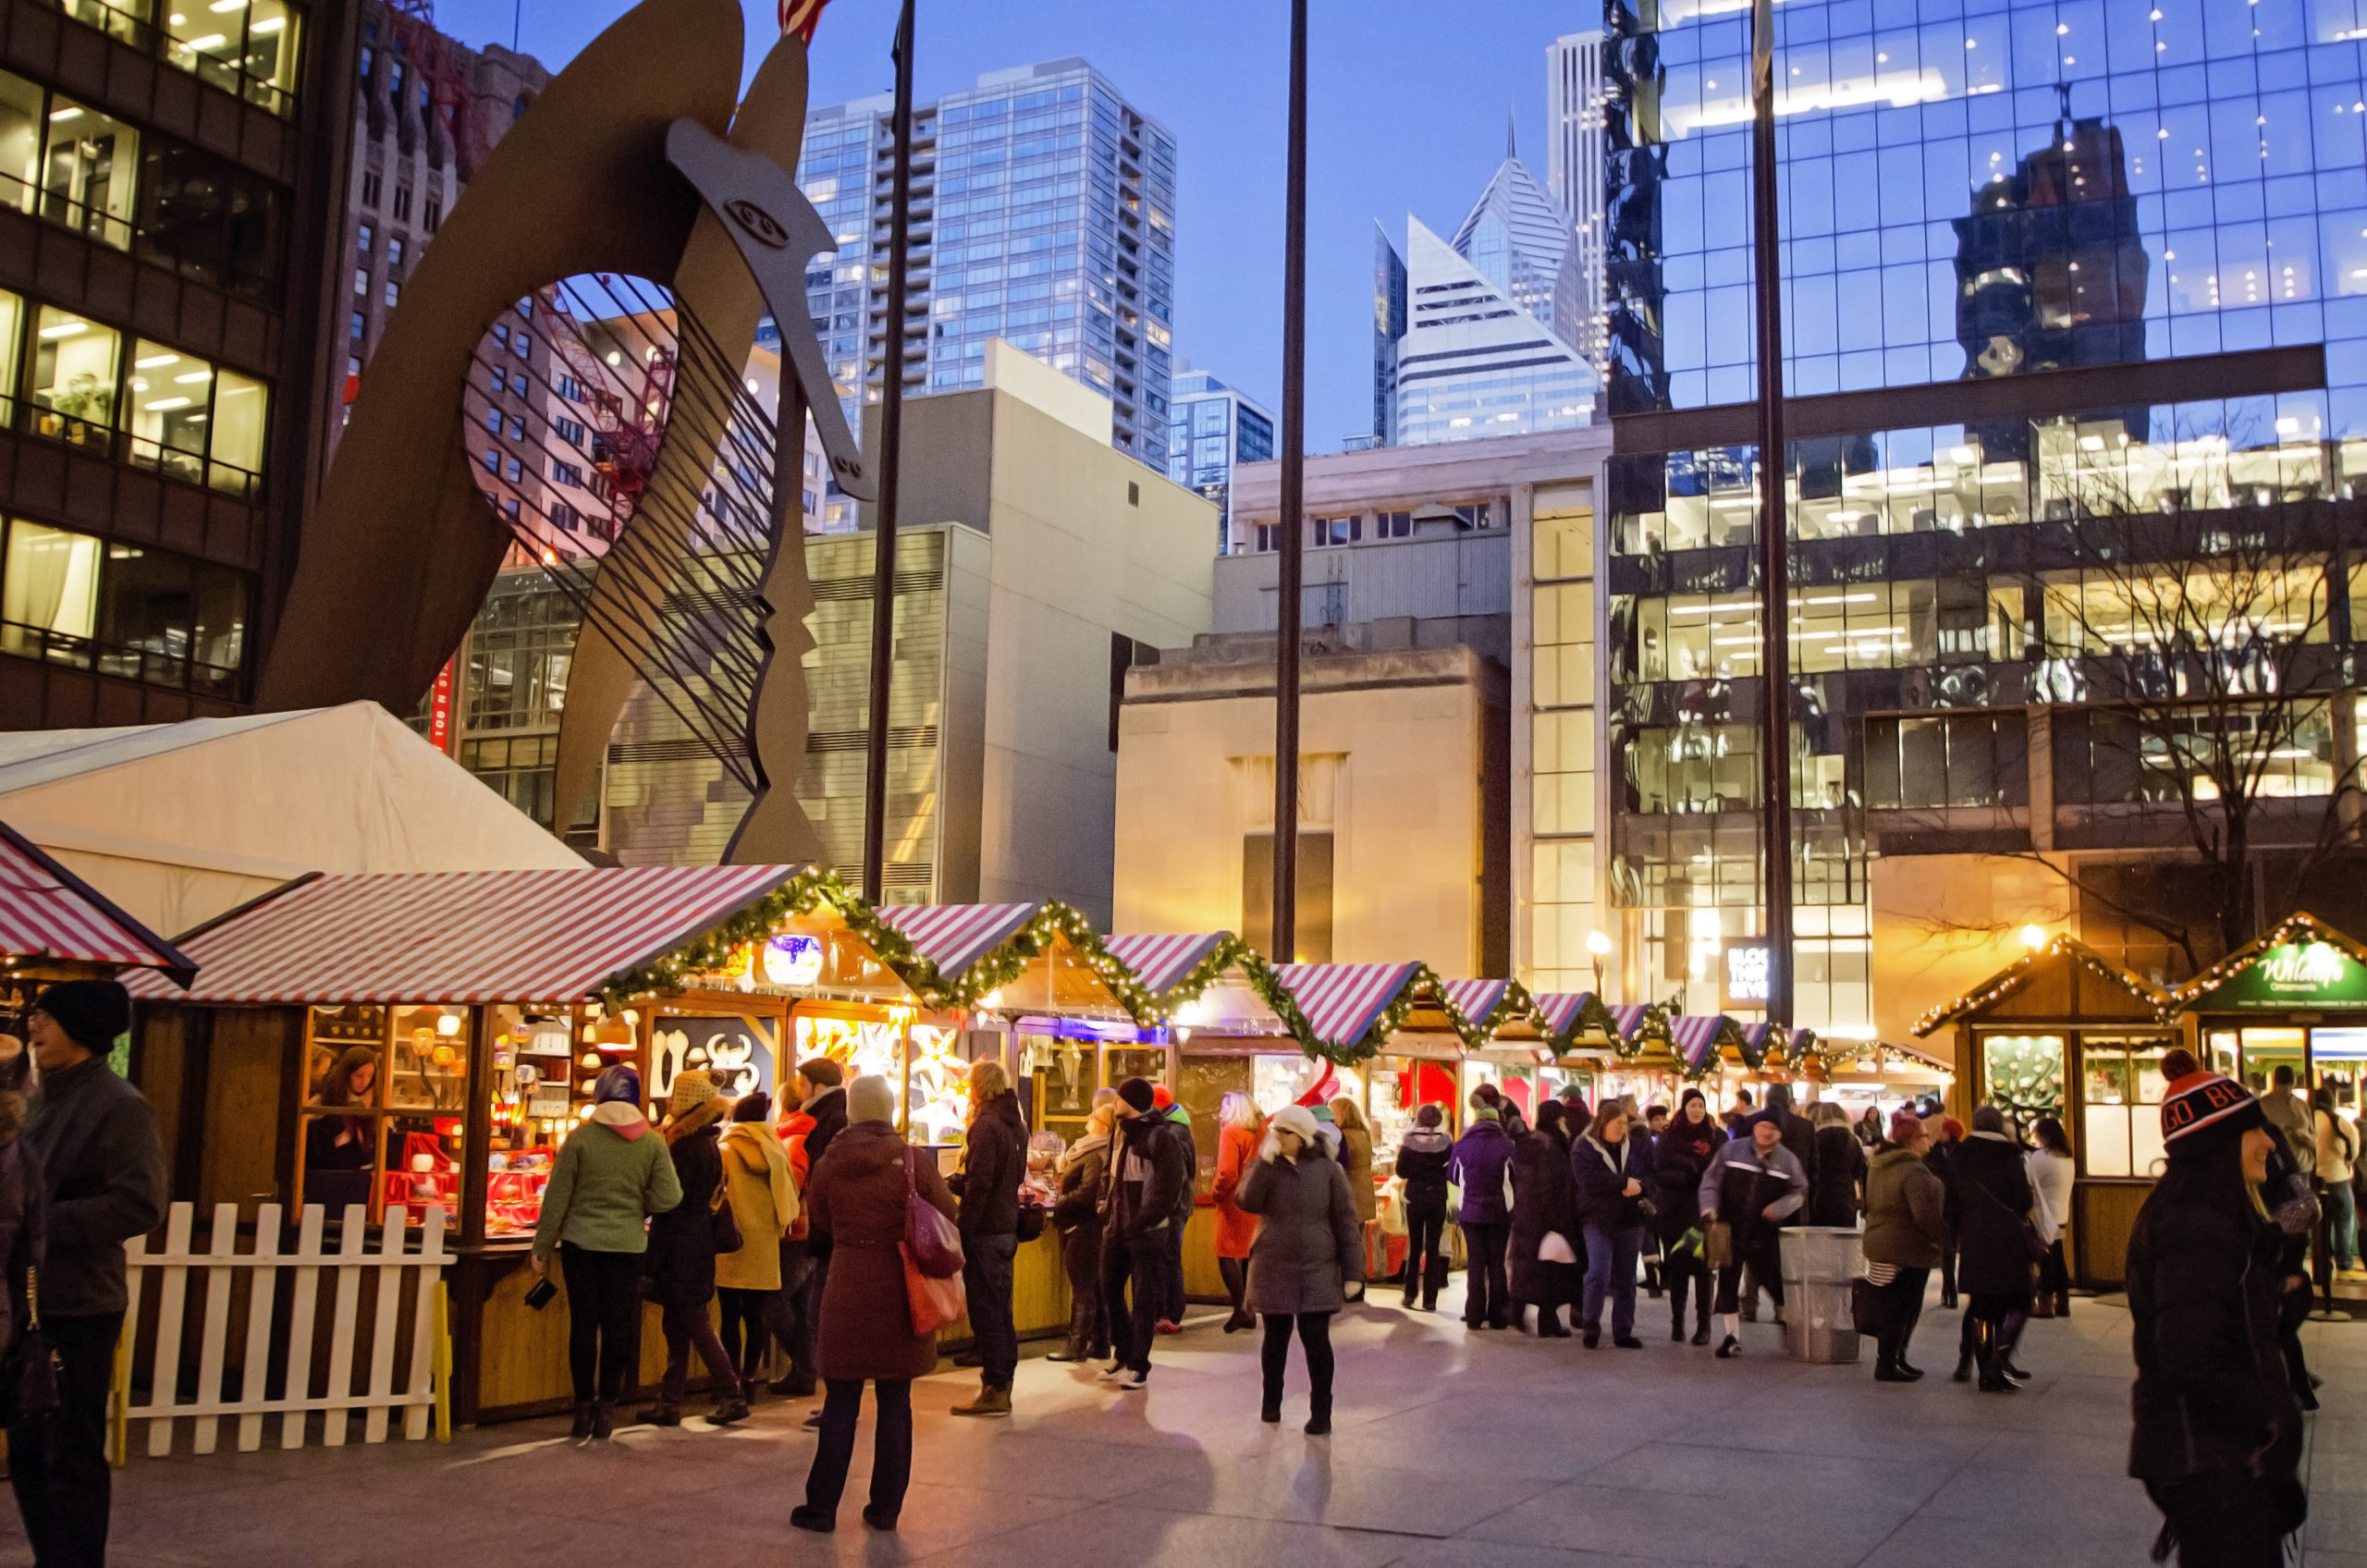 A view of a row of vendors at the Christkindlmarket Chicago.